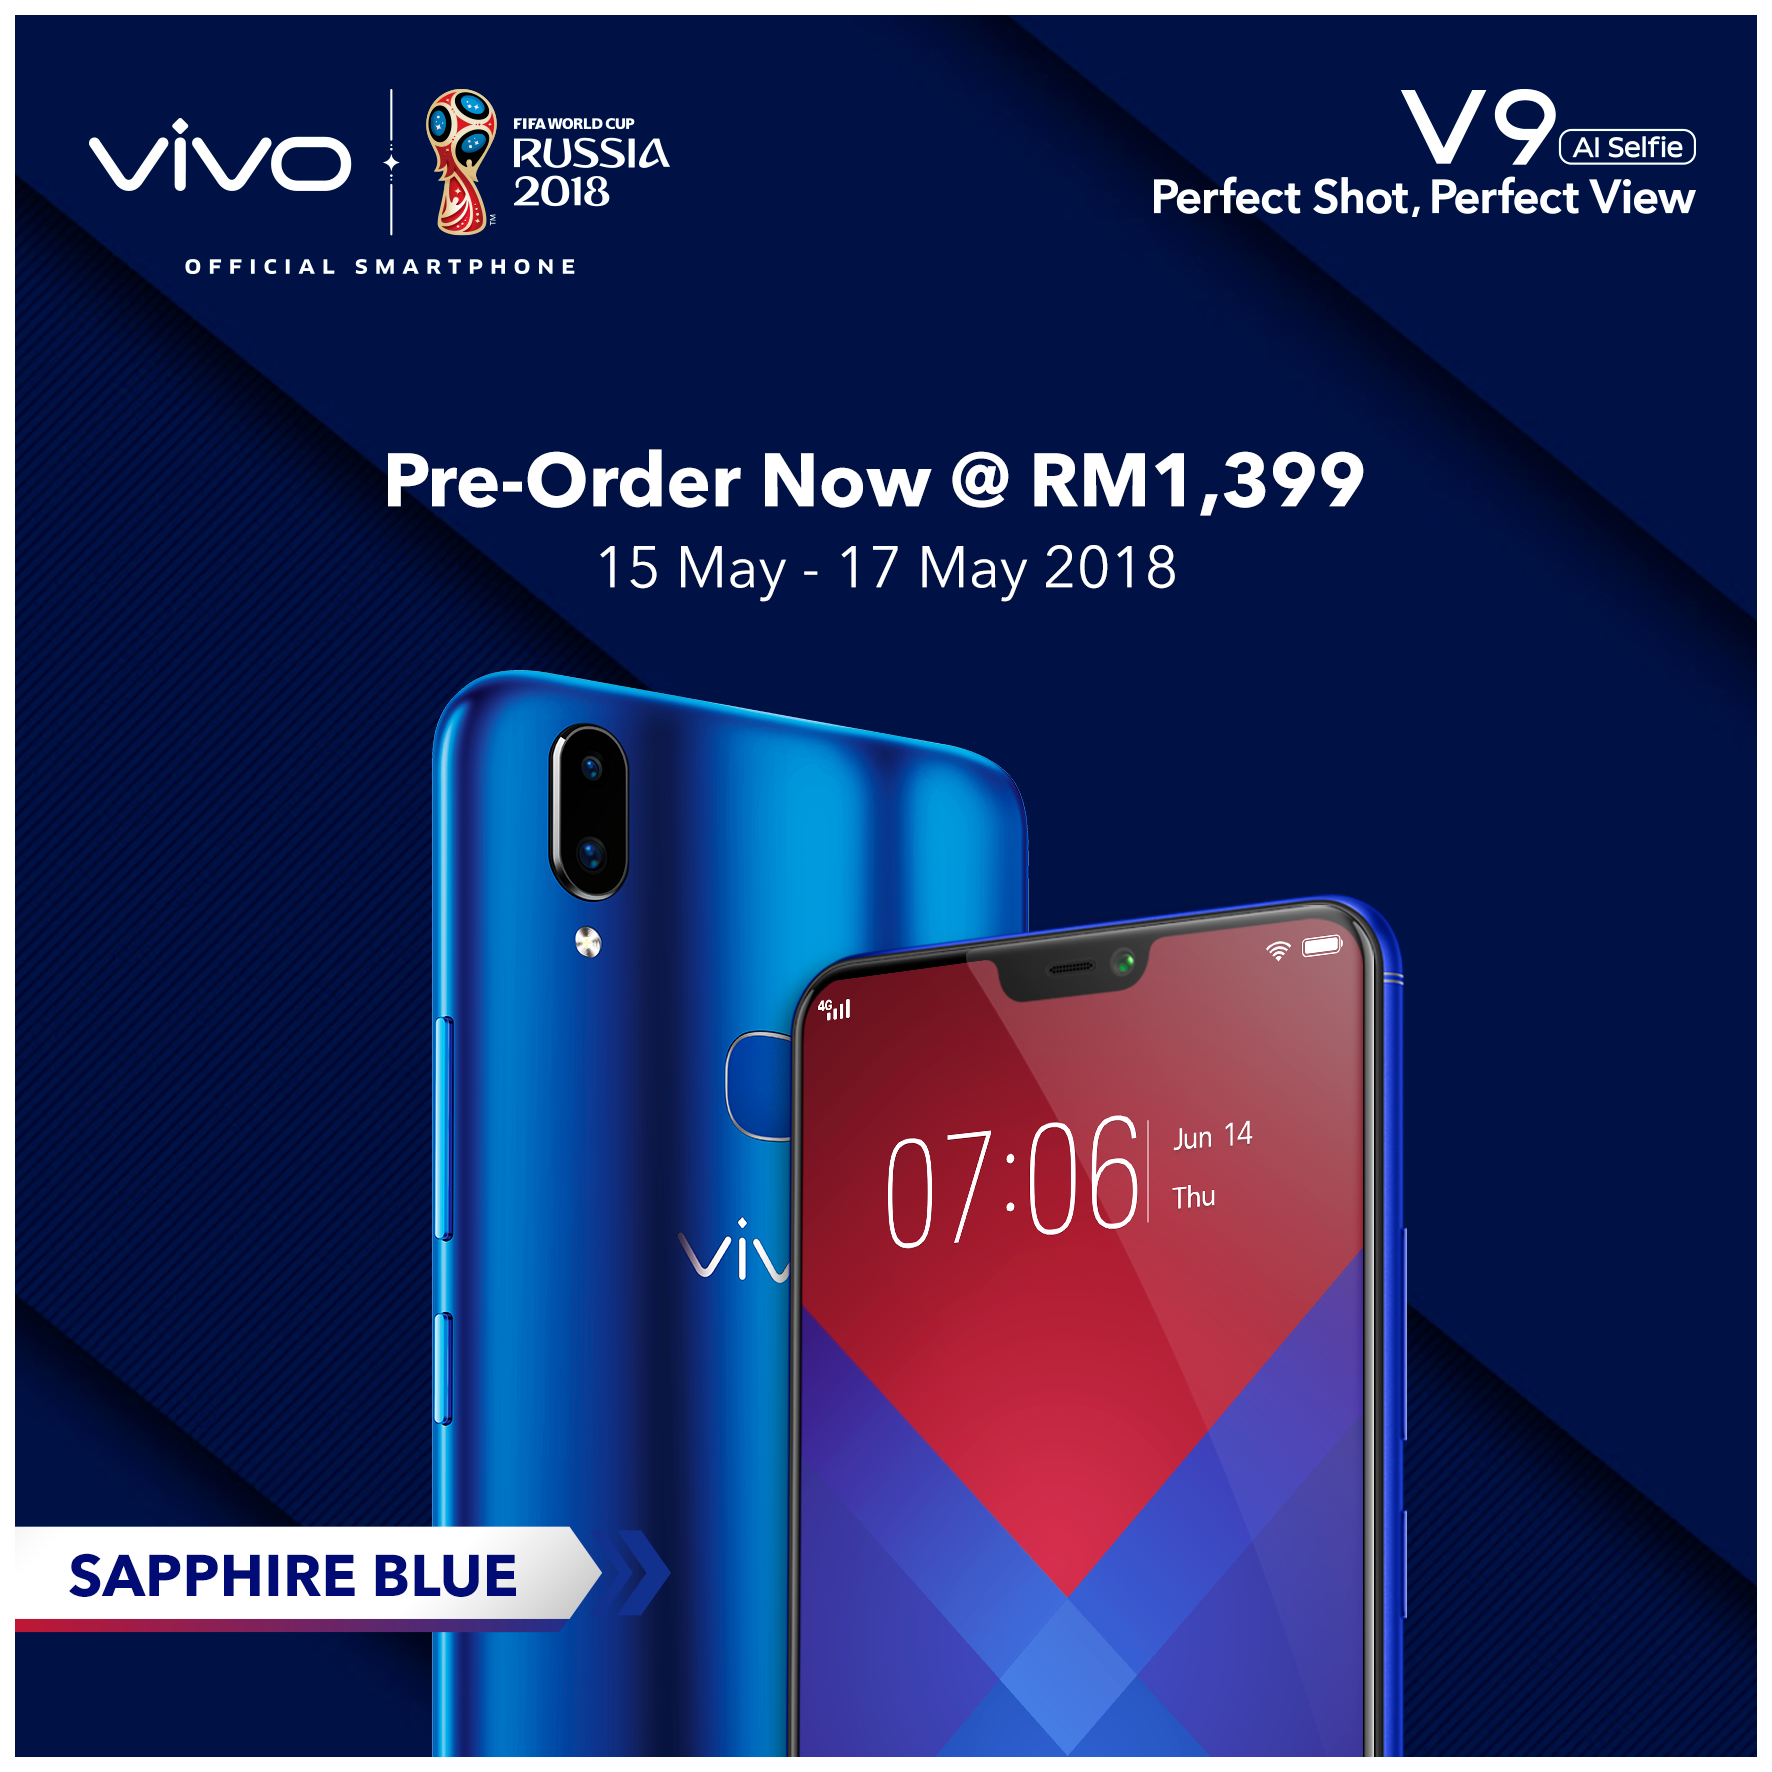 vivo Malaysia changed the pre-order date for V9 Sapphire Blue to 15 - 17 May 2018